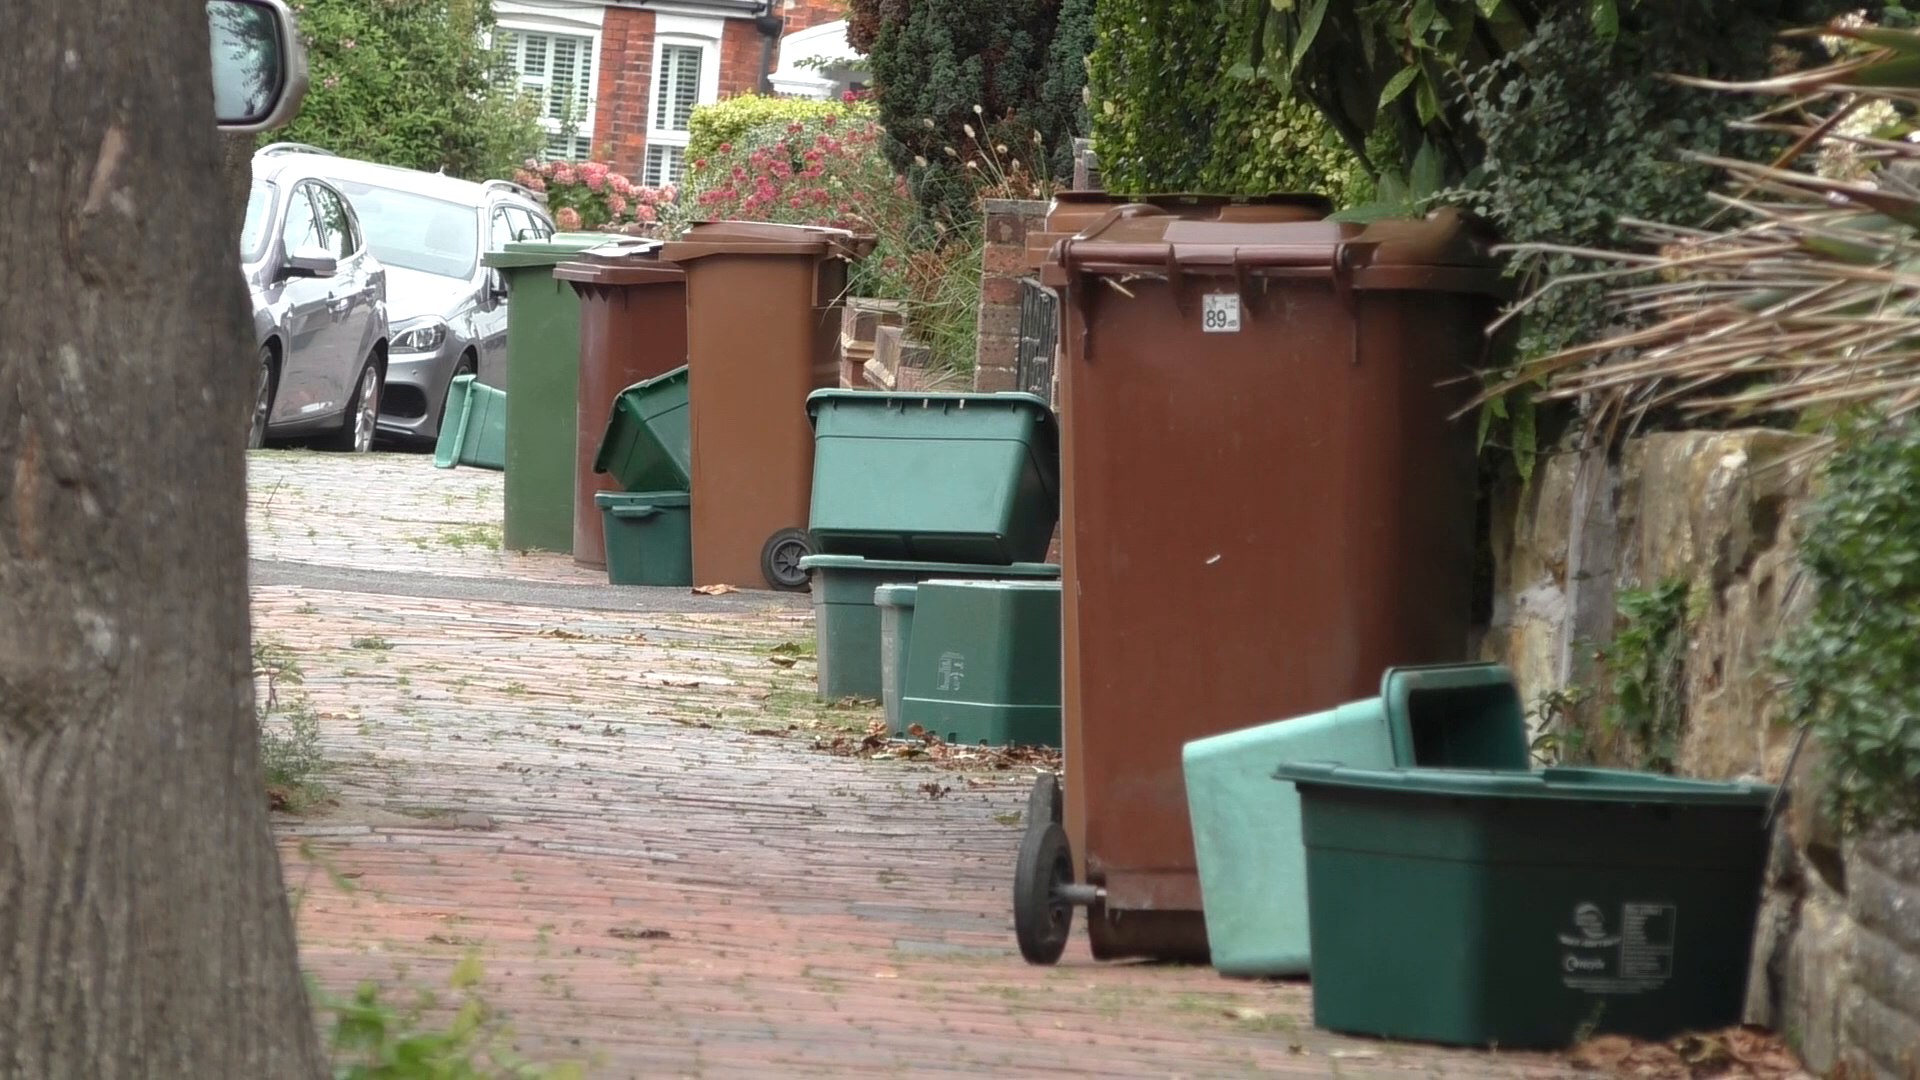 Tunbridge Wells reacts to new waste collection proposals - video Dailymotion